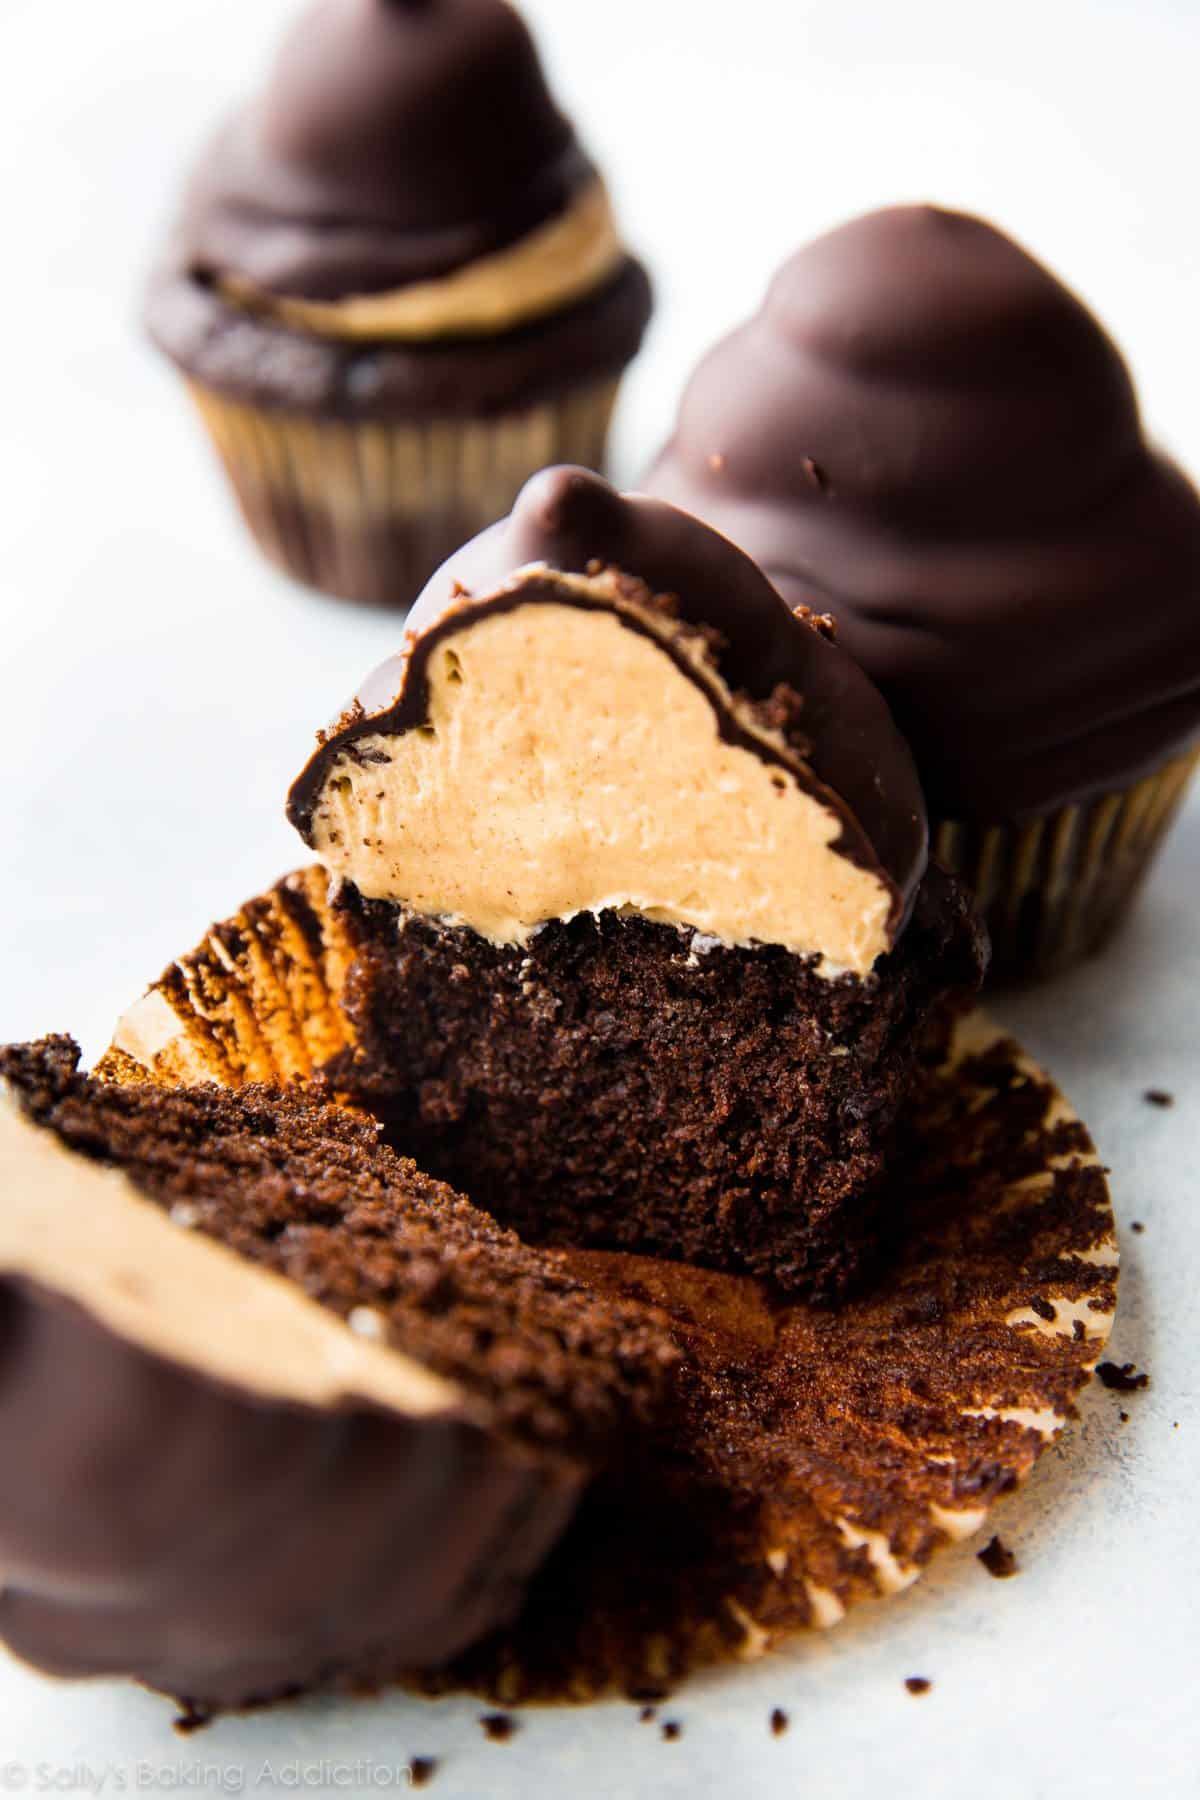 hi-hat cupcake cut in half showing chocolate cupcake topped with peanut butter frosting inside a chocolate coating